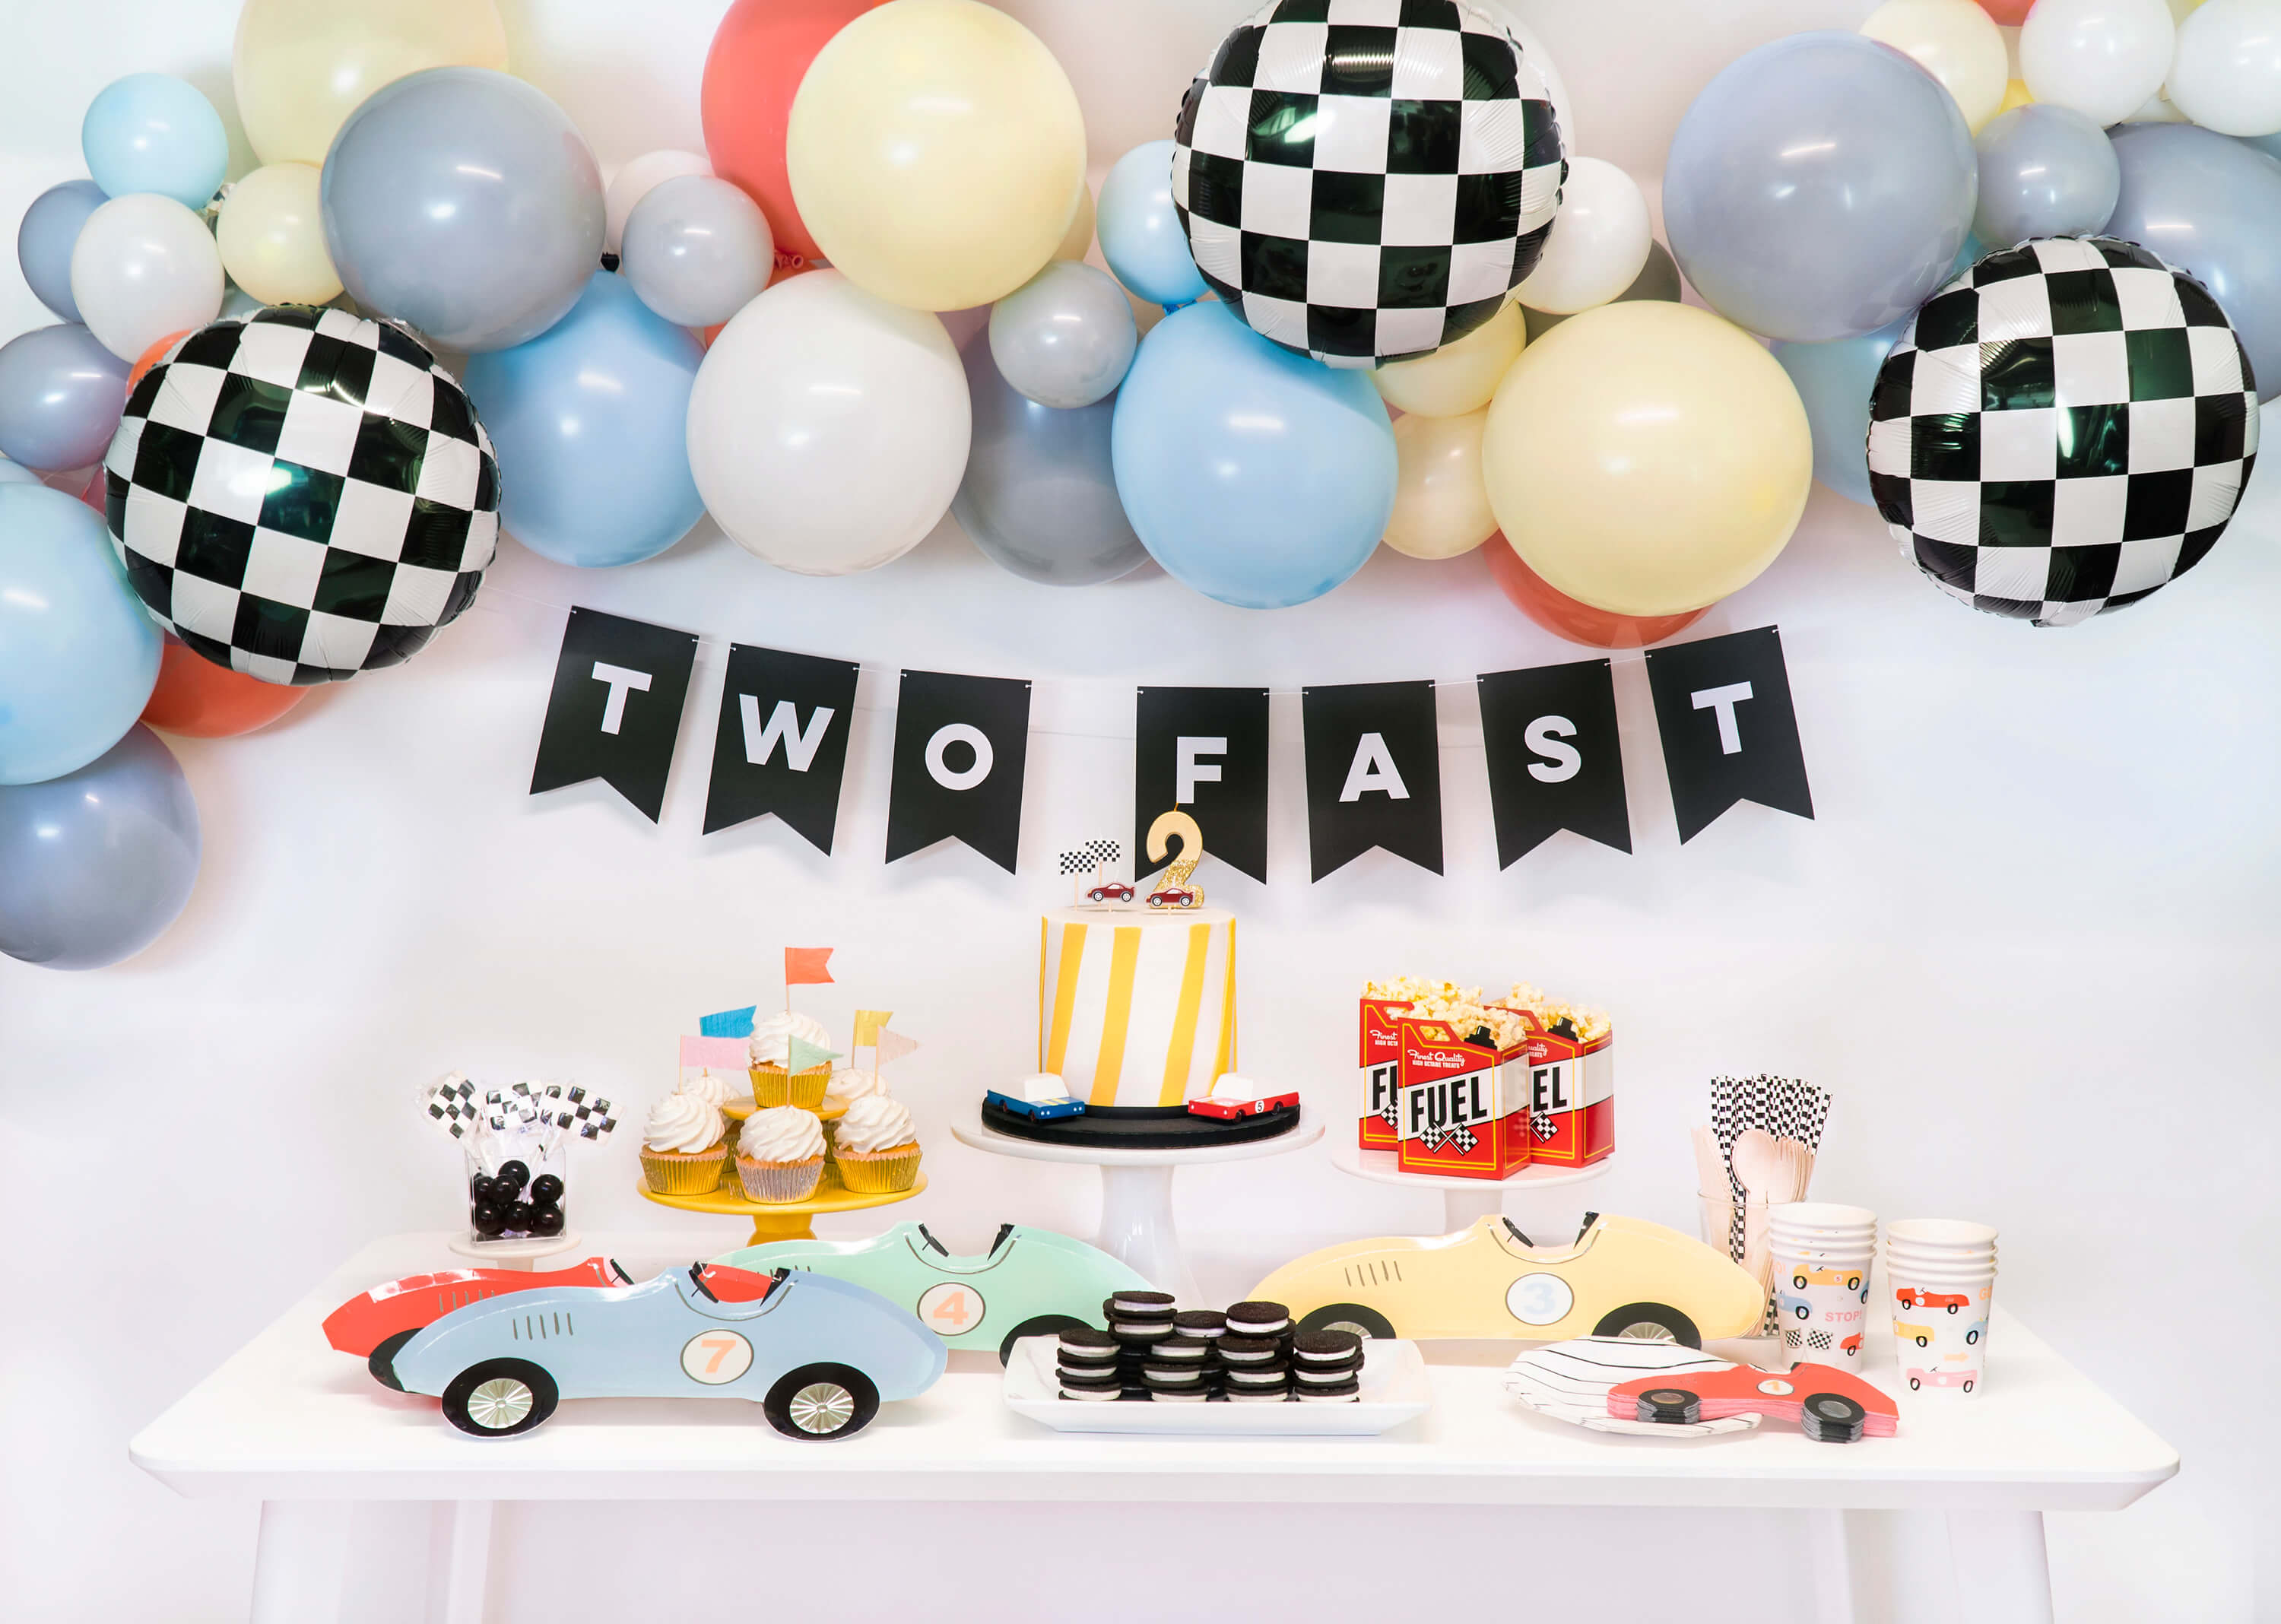 Half Year Old Birthday Party Decorations for Girls Or Boys Gold Glitter  Happy Half Birthday Banner 1/2 Way To One Cake Topper Balloons Set For 6  Months Birthday Party Supplies 